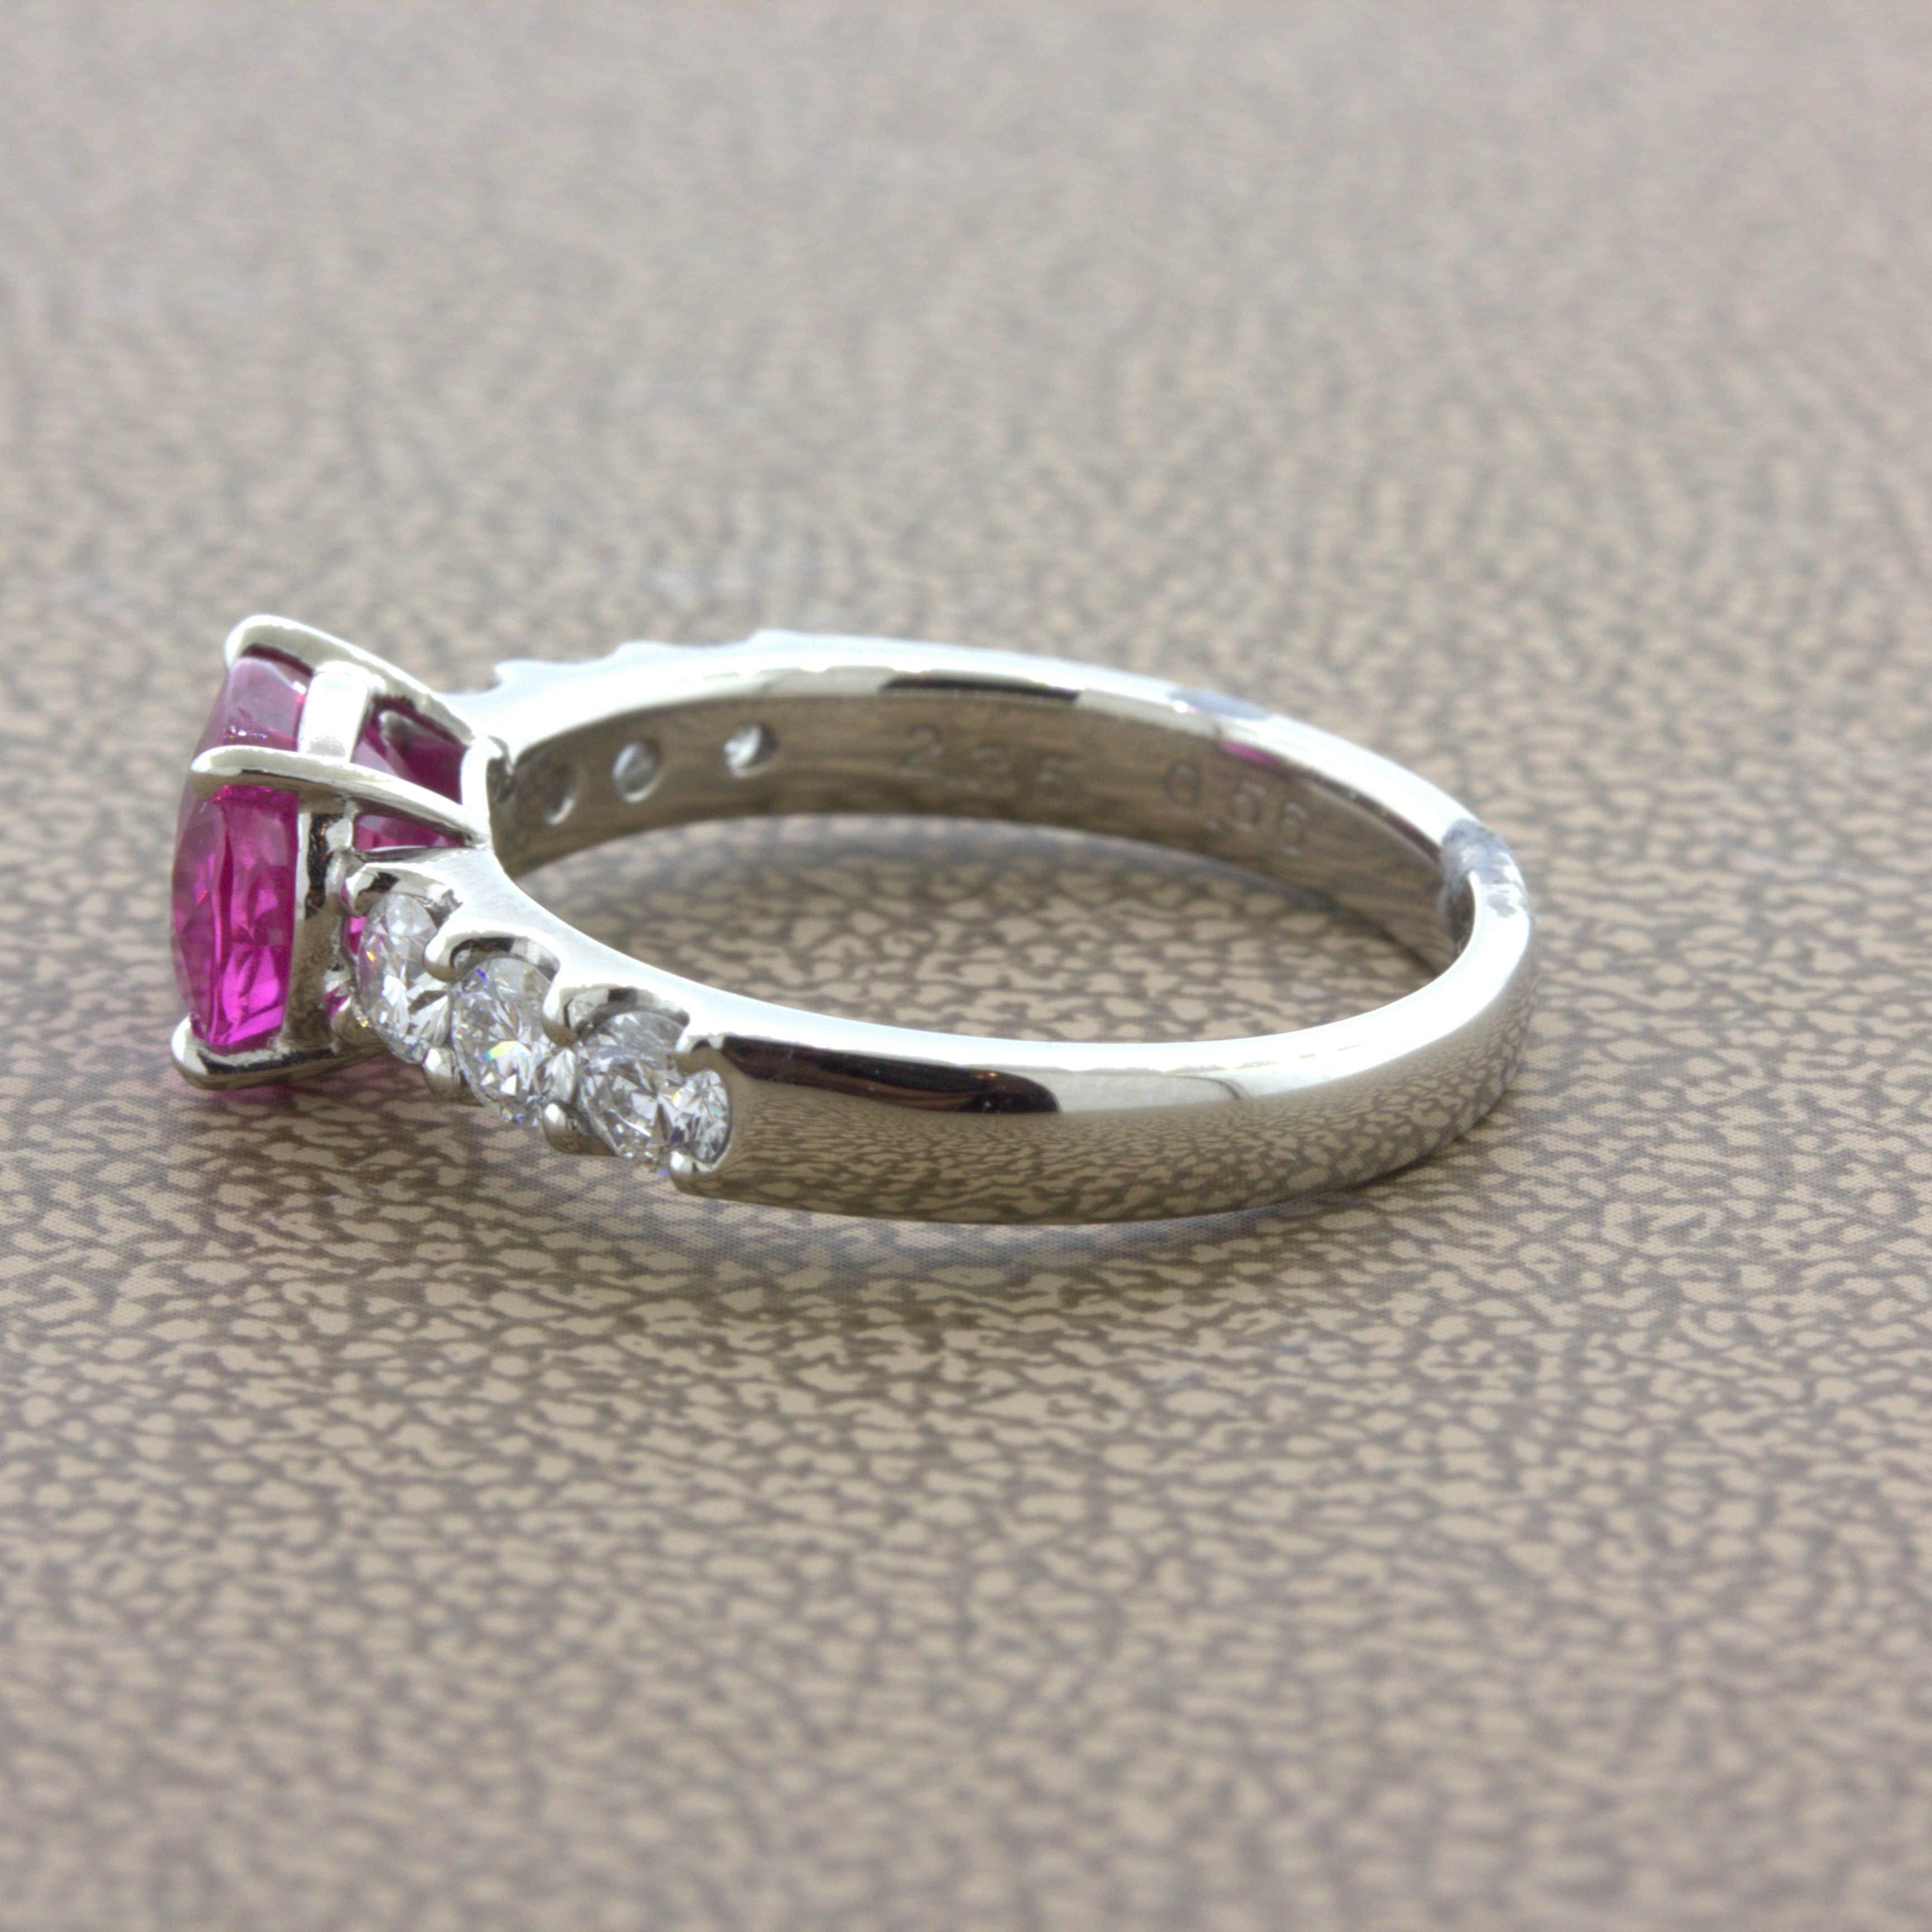 Exceptional 2.36 Carat Hot-Pink Sapphire Diamond Platinum Ring, GIA Certified In New Condition For Sale In Beverly Hills, CA